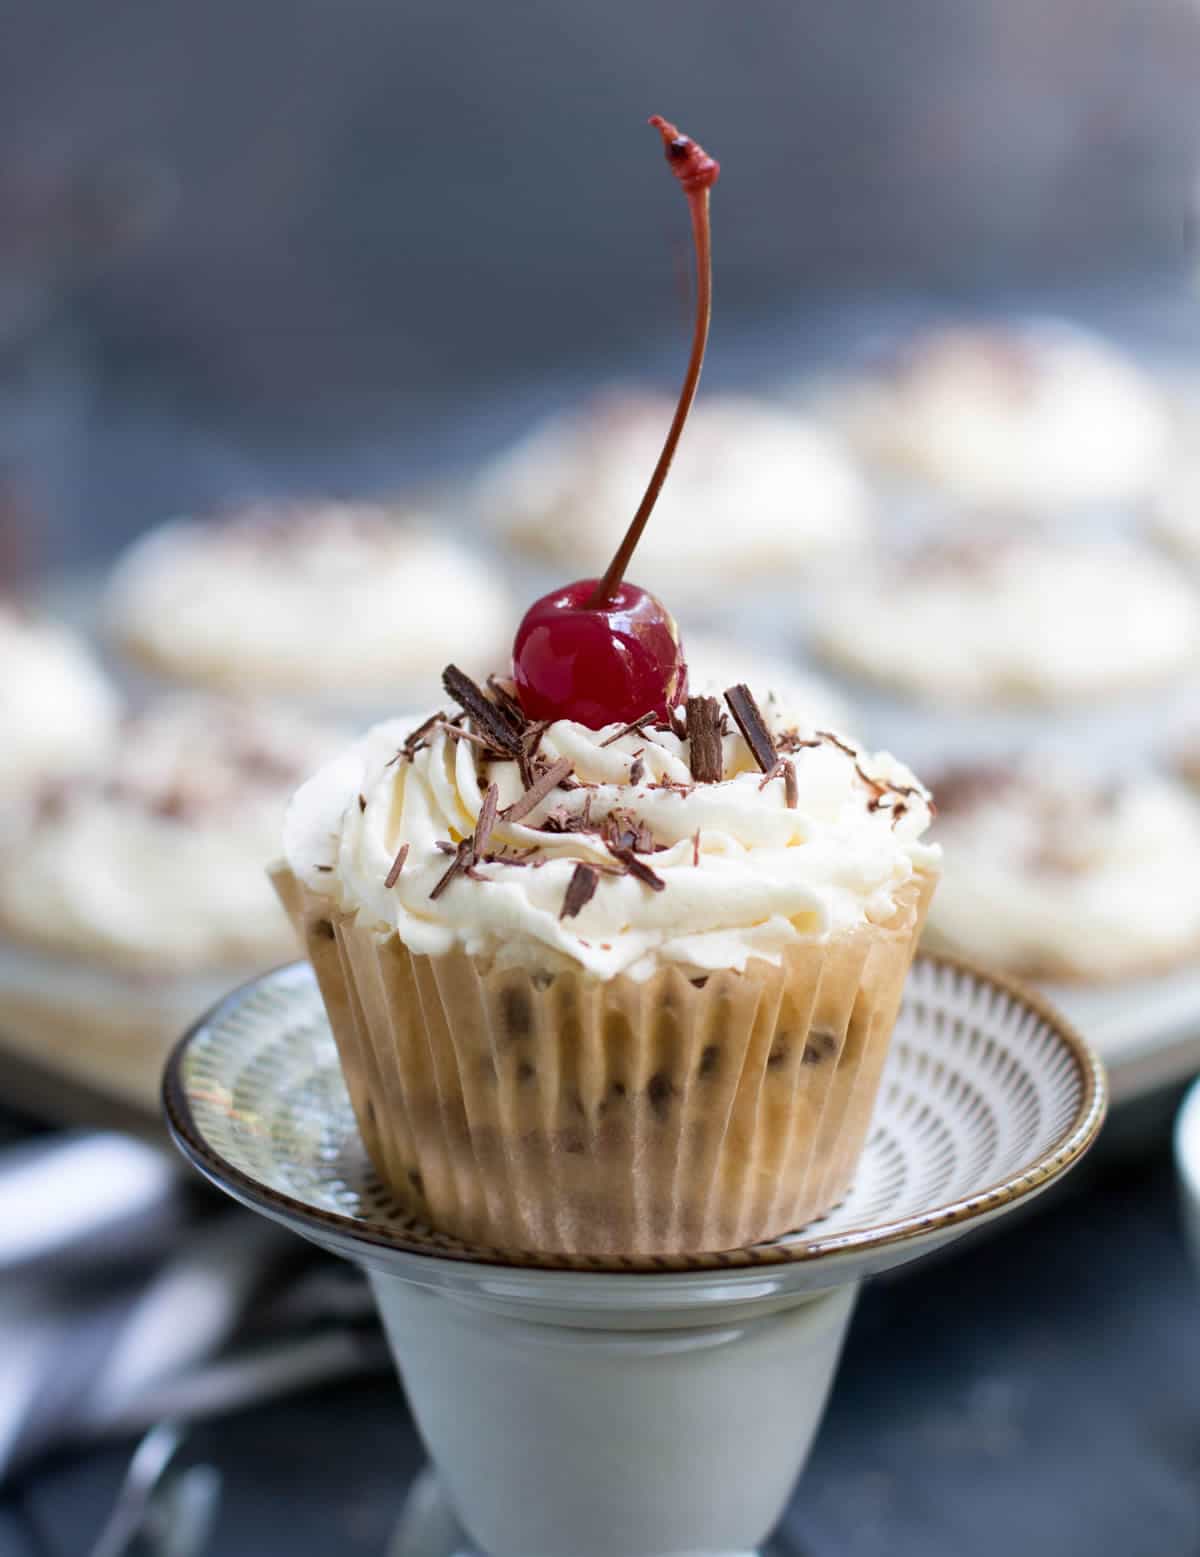 No Bake Ice Box Cannoli Cupcakes. Easy, one bowl ricotta filling is layered with vanilla wafers, topped with whipped cream, chocolate shavings and a cherry!